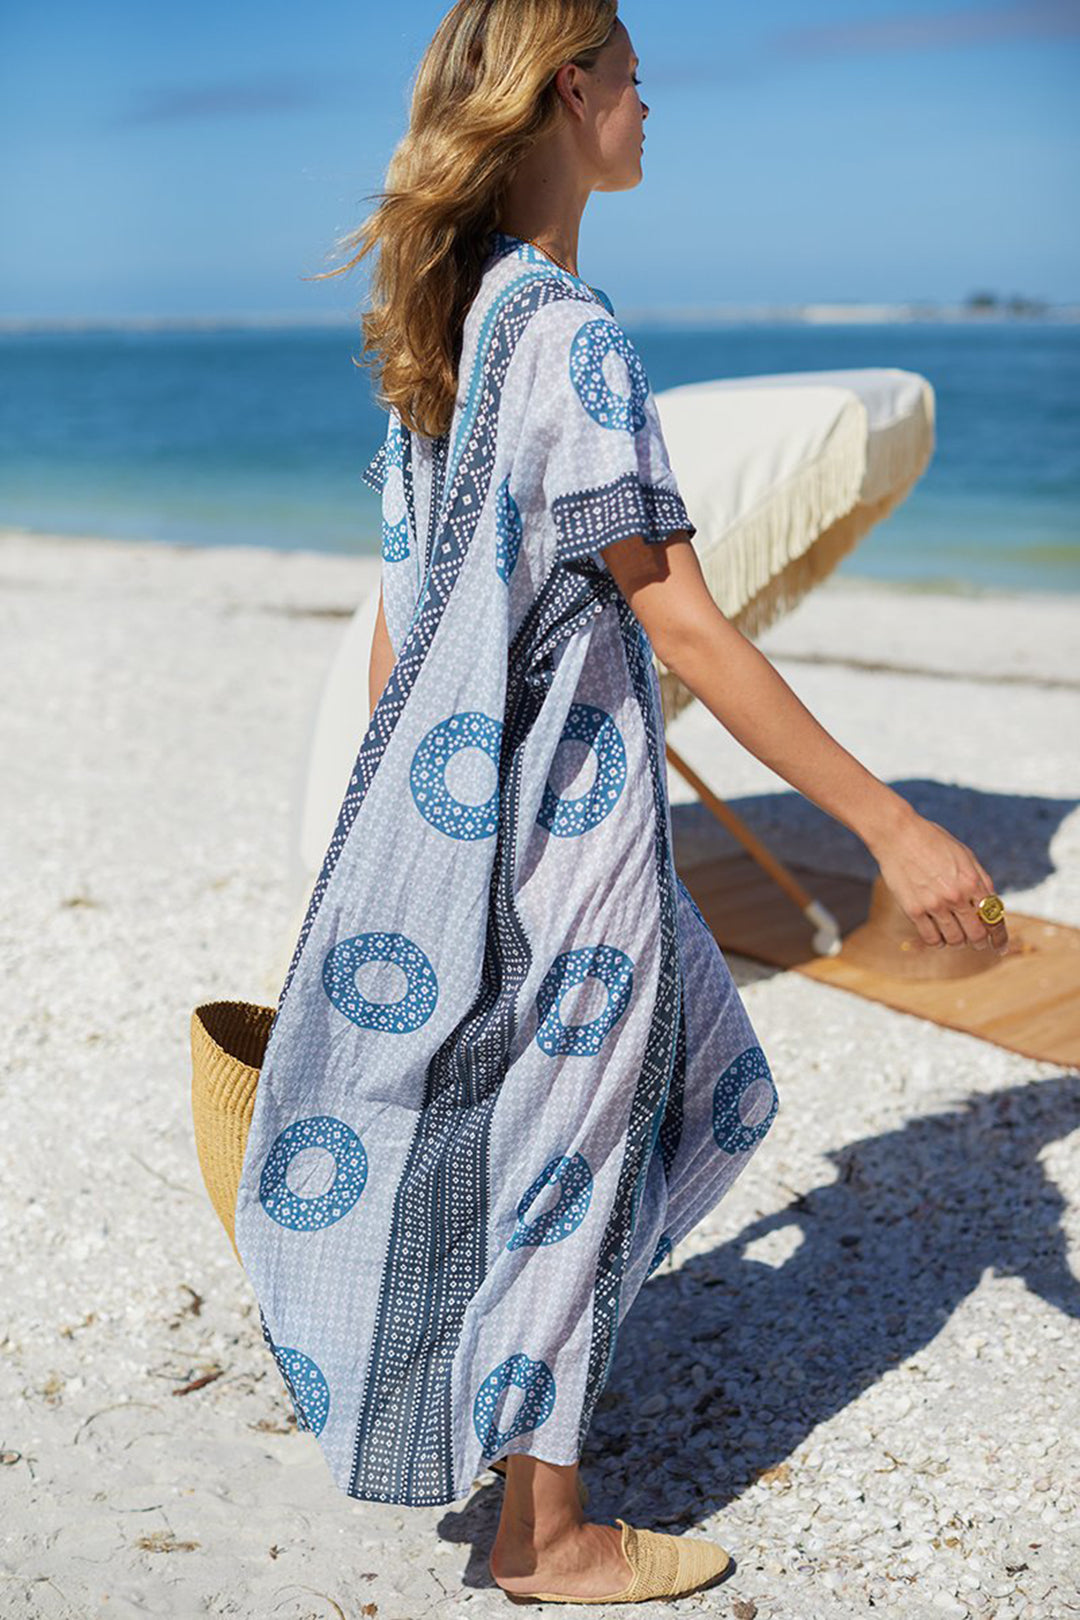 At the beach in the Emerson Fry Emerson Caftan beach cover-up in Cerulean Organic blue print at Inner Beach Co, Toronto, Canada